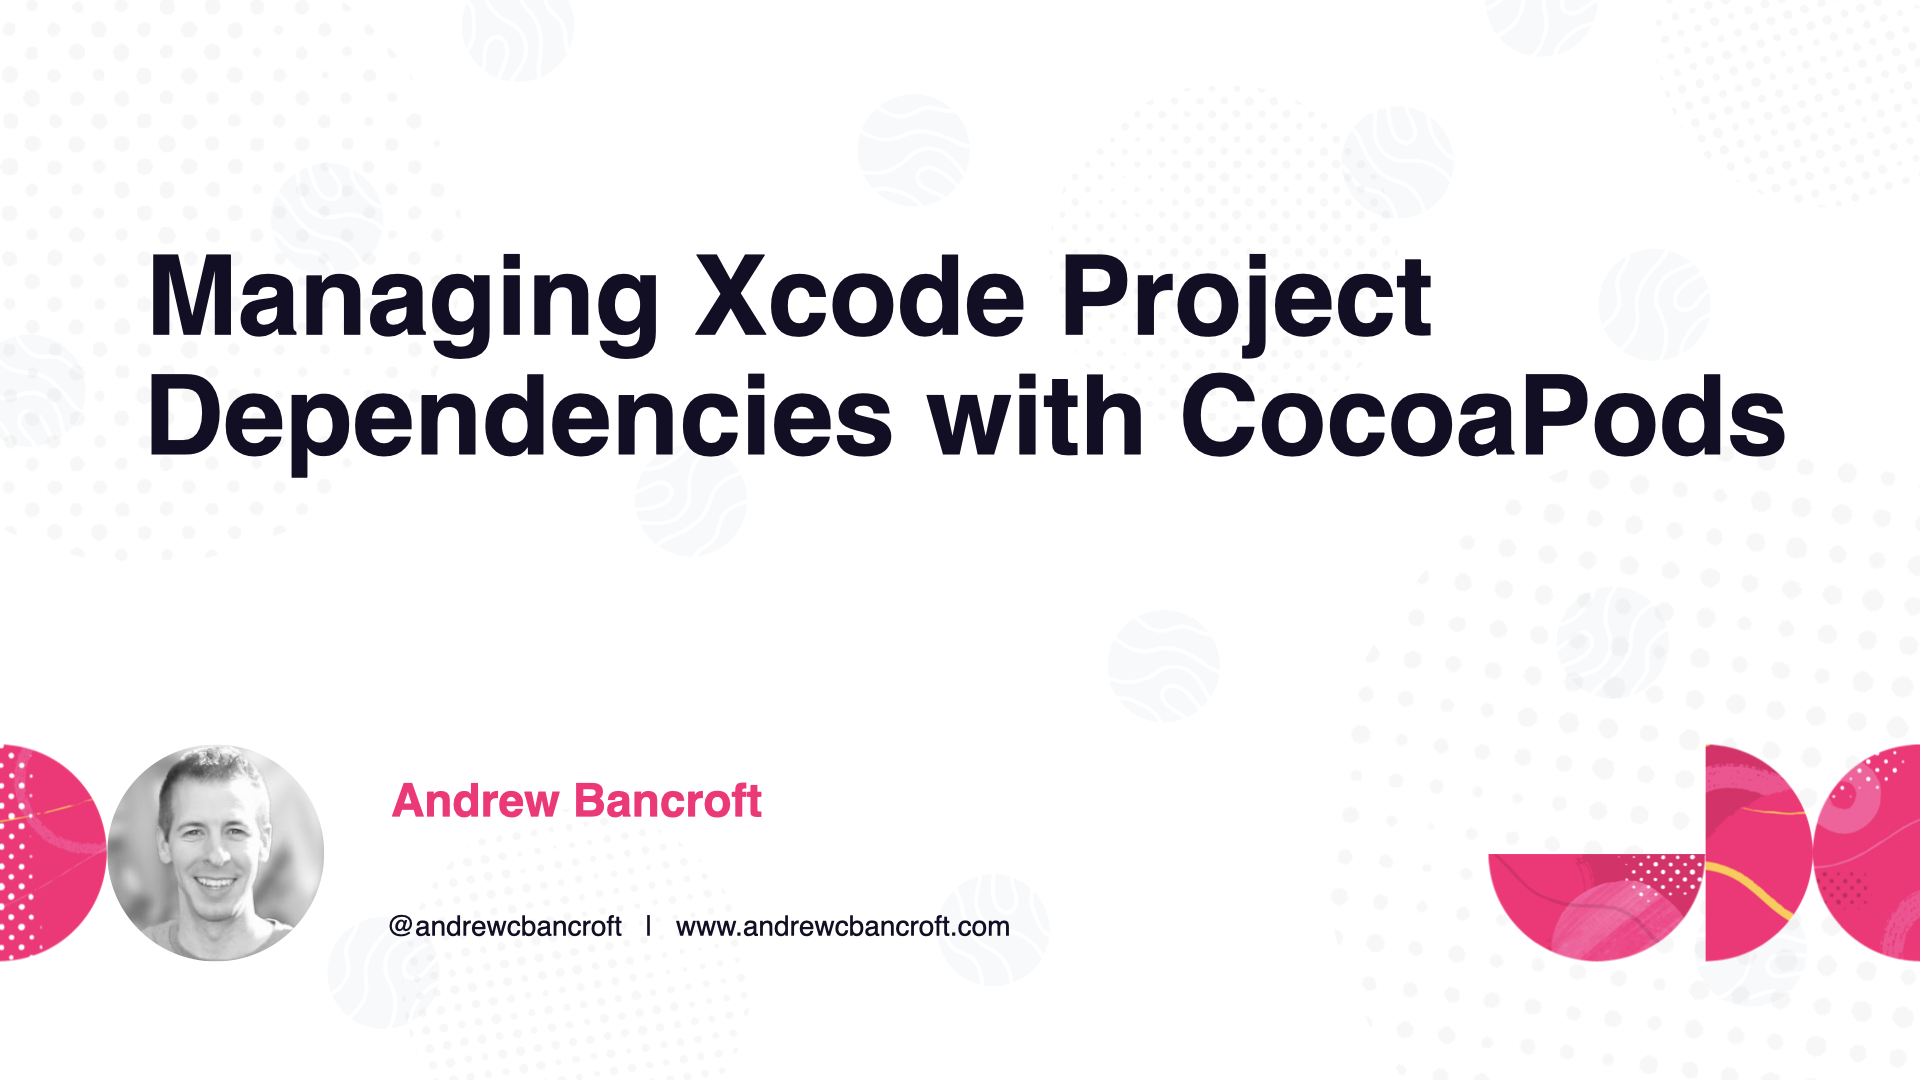 Managing Xcode Project Dependencies with CocoaPods